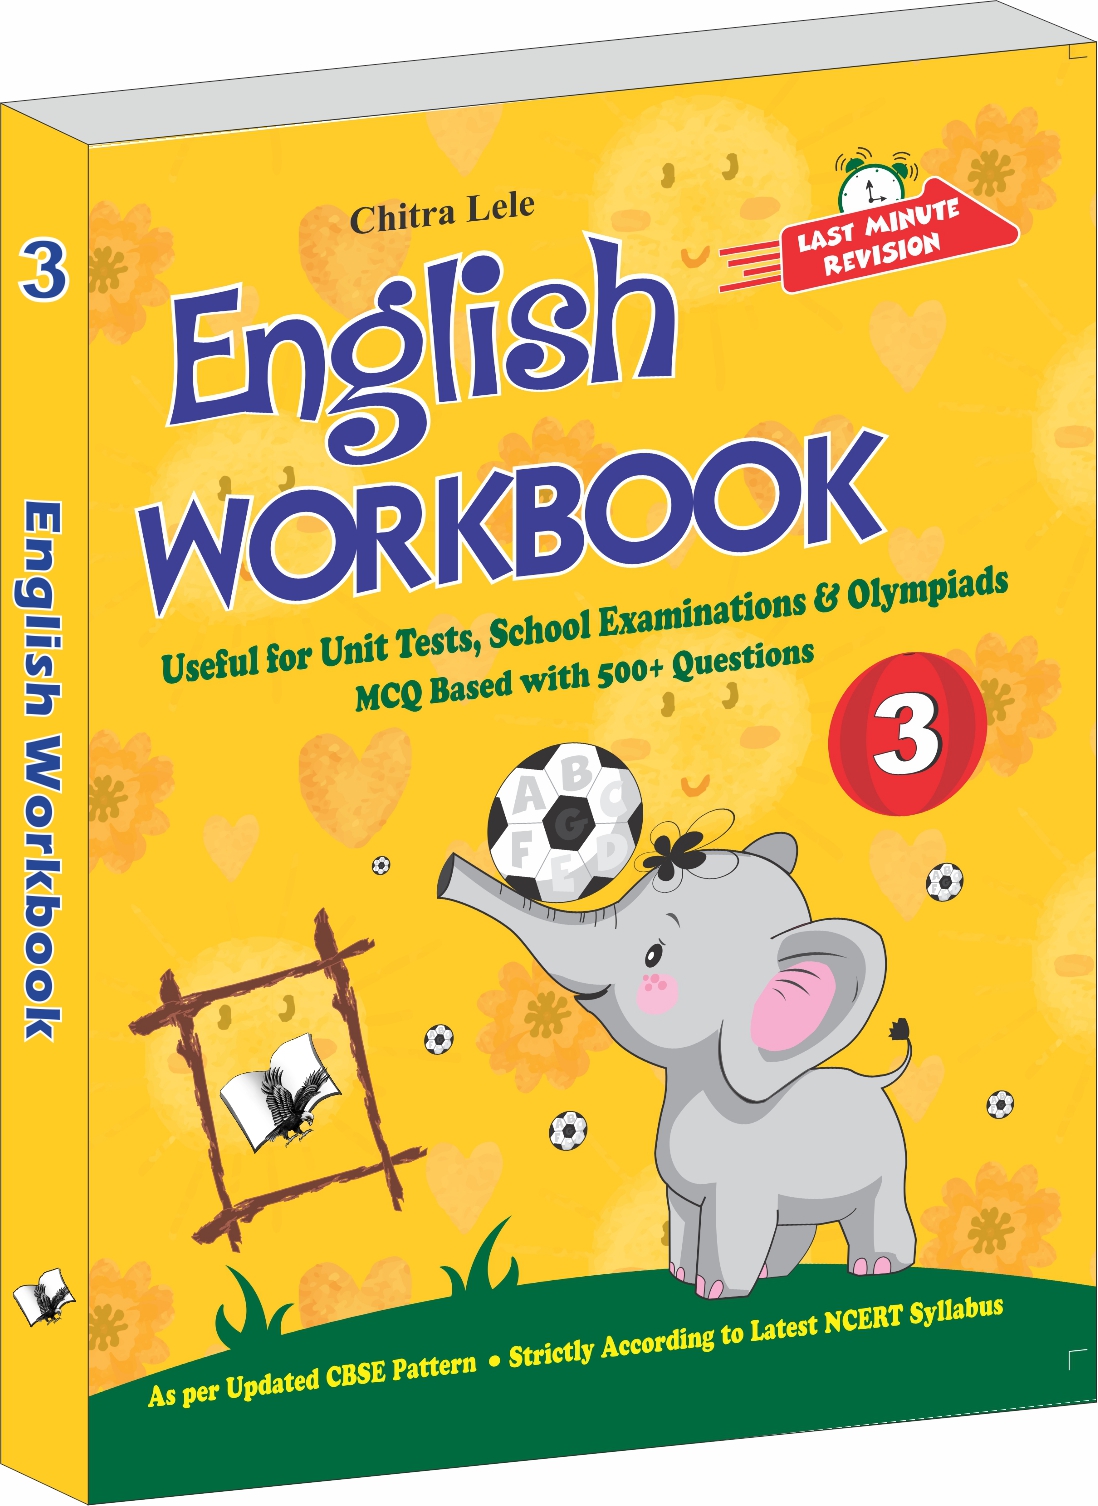 English Workbook Class 3-Useful for Unit Tests, School Examinations & Olympiads